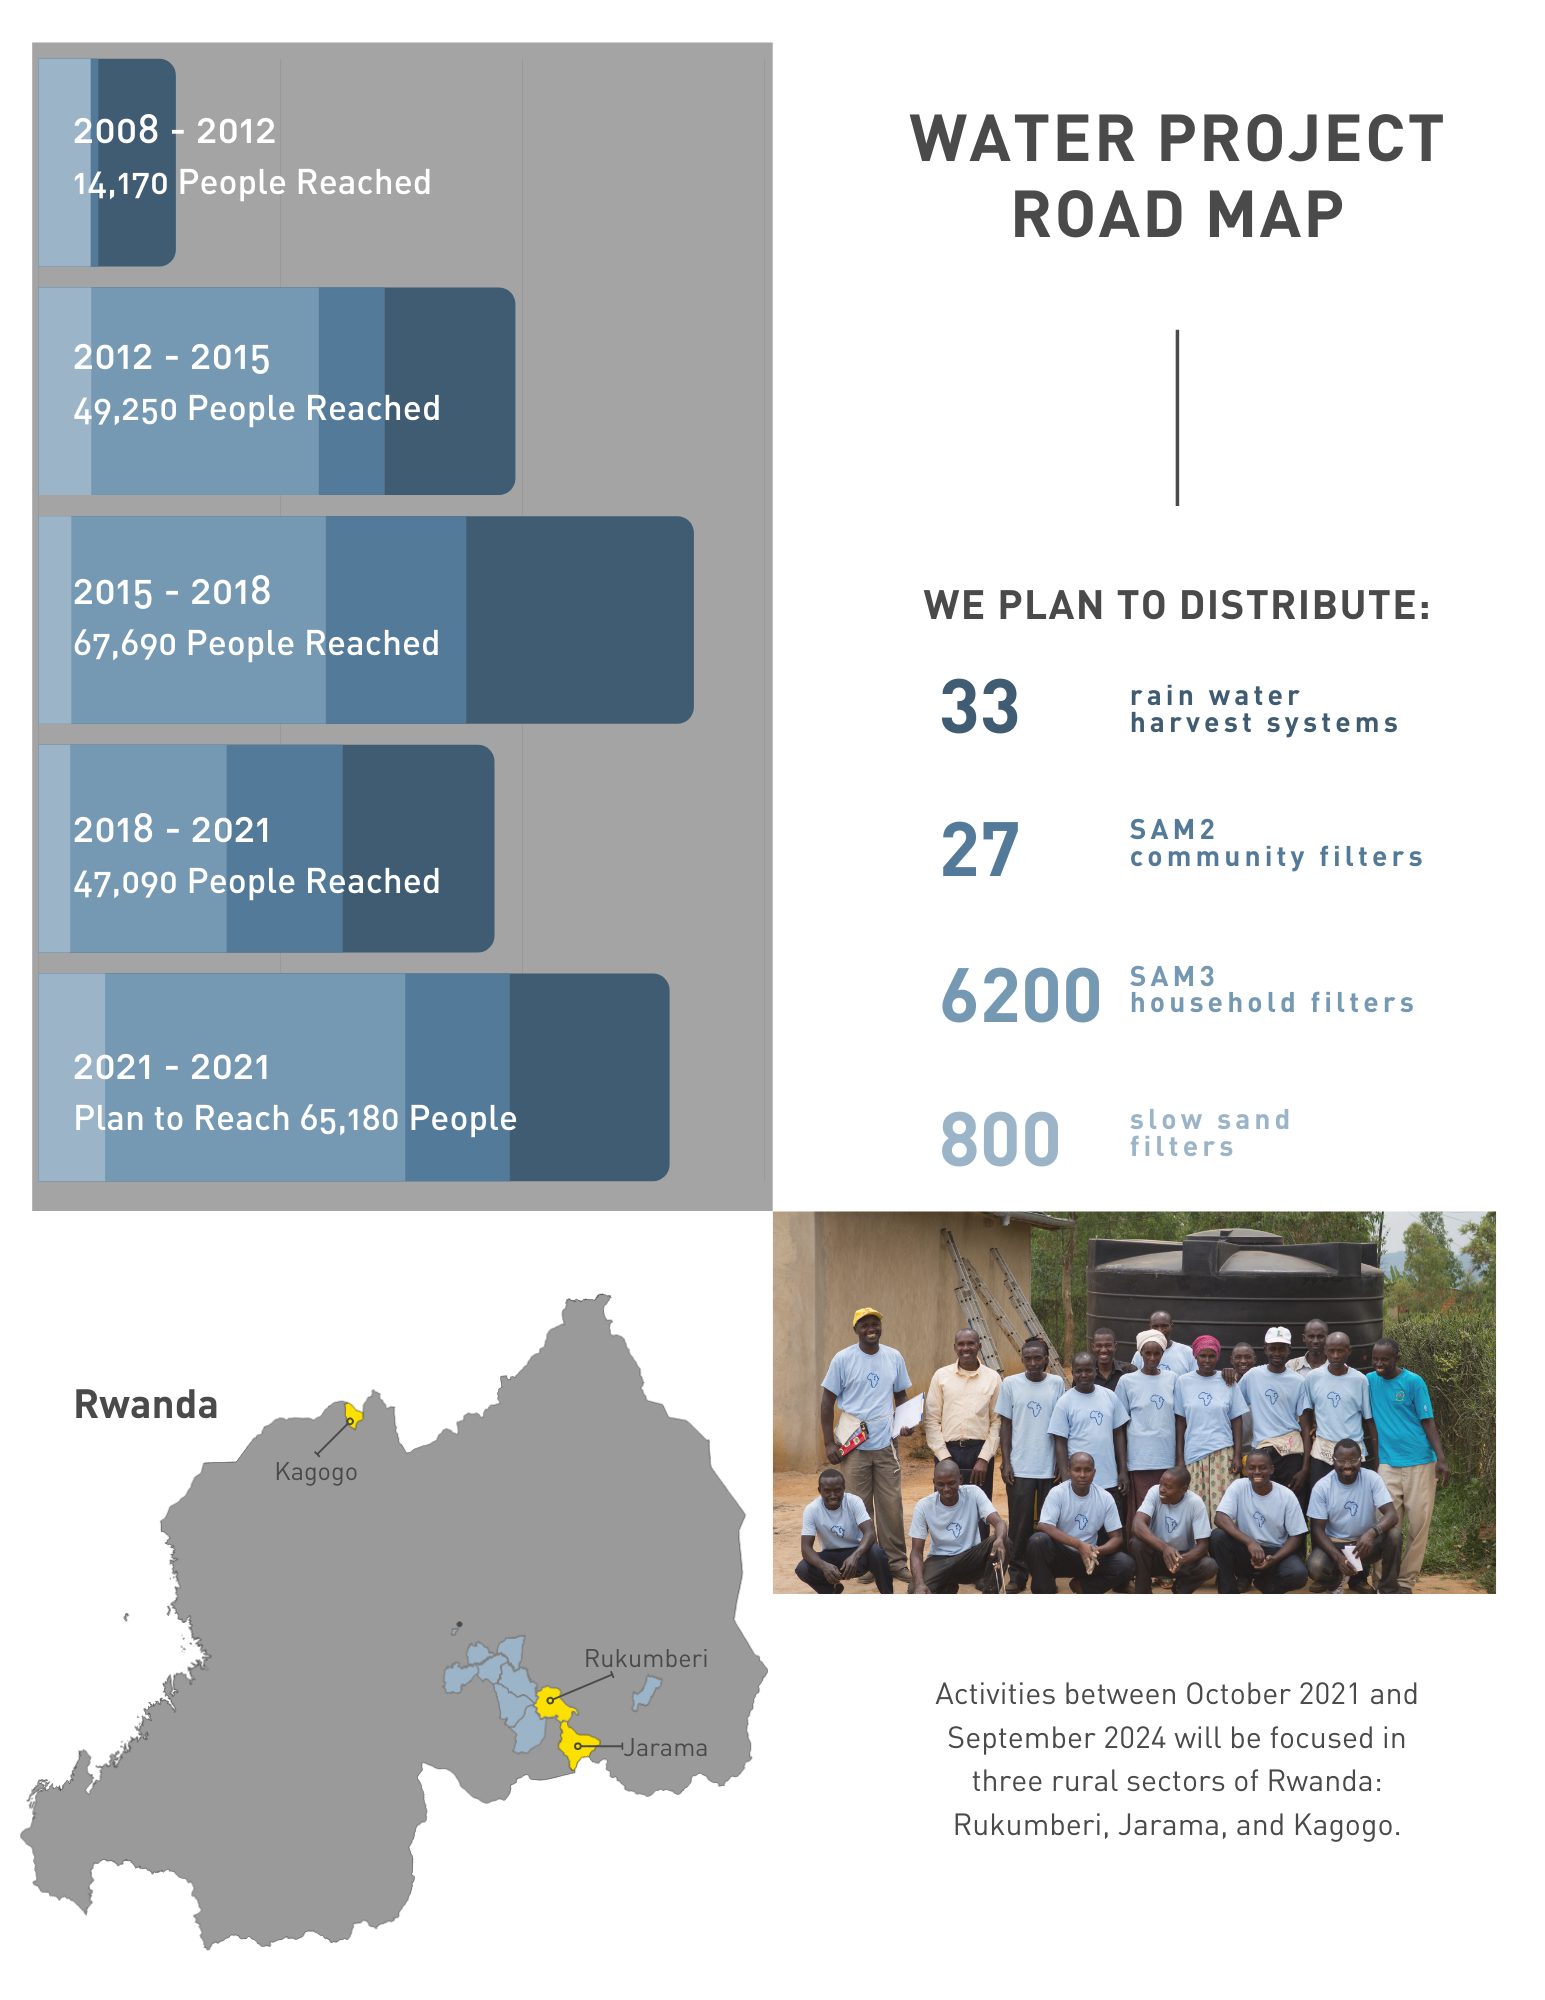 Water Project Road Map Page 2, includes a graph outlining the history of the Water Project, a Map of Current Sectors in Rwanda, and the number of each technology that we plan to distribute in the next three years.